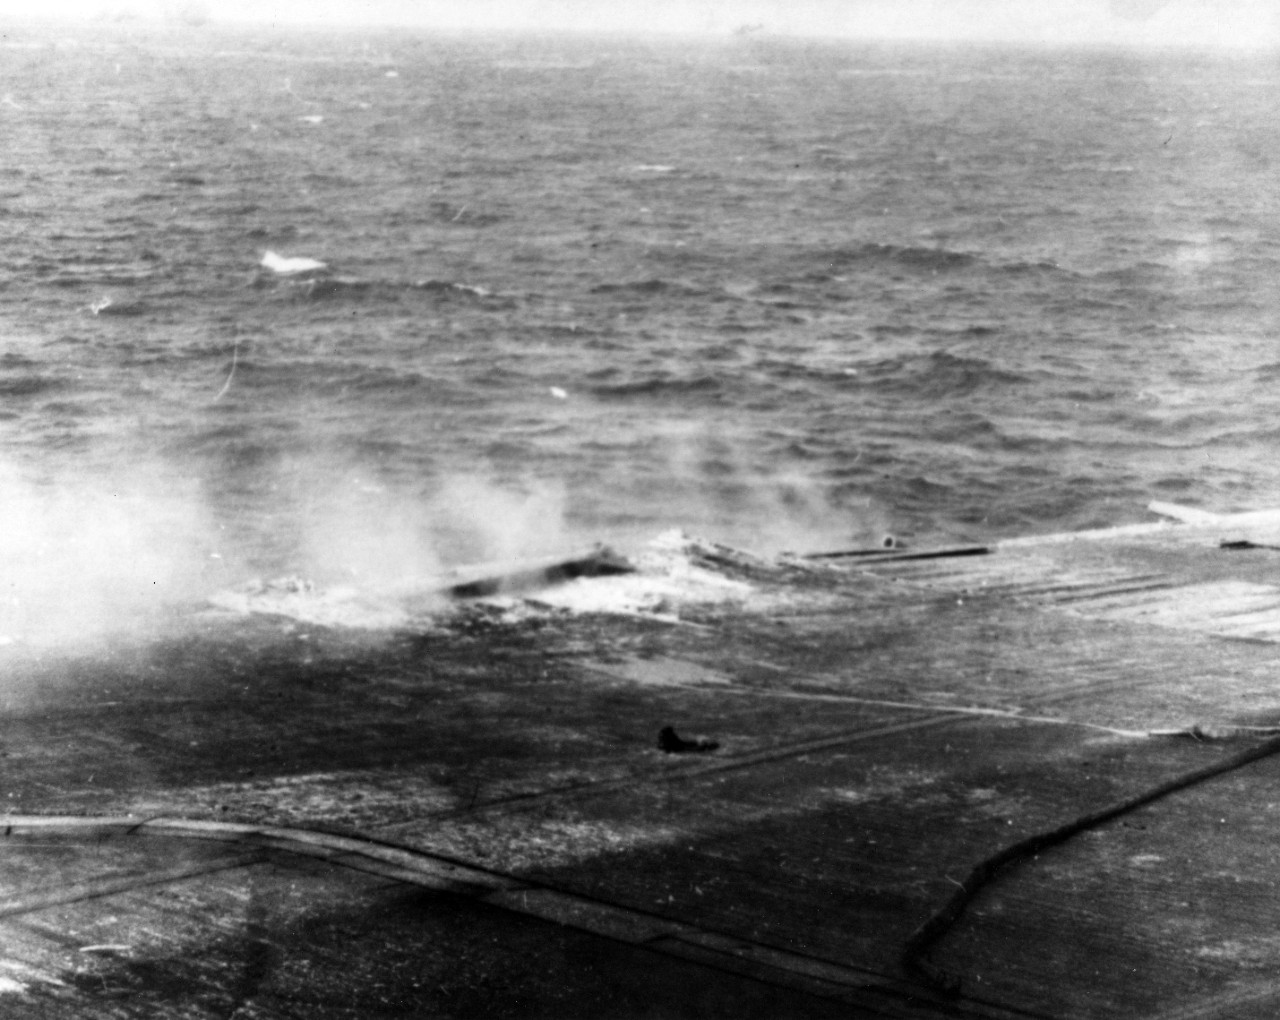 Photo #: 80-G-16809  Battle of the Coral Sea, May 1942